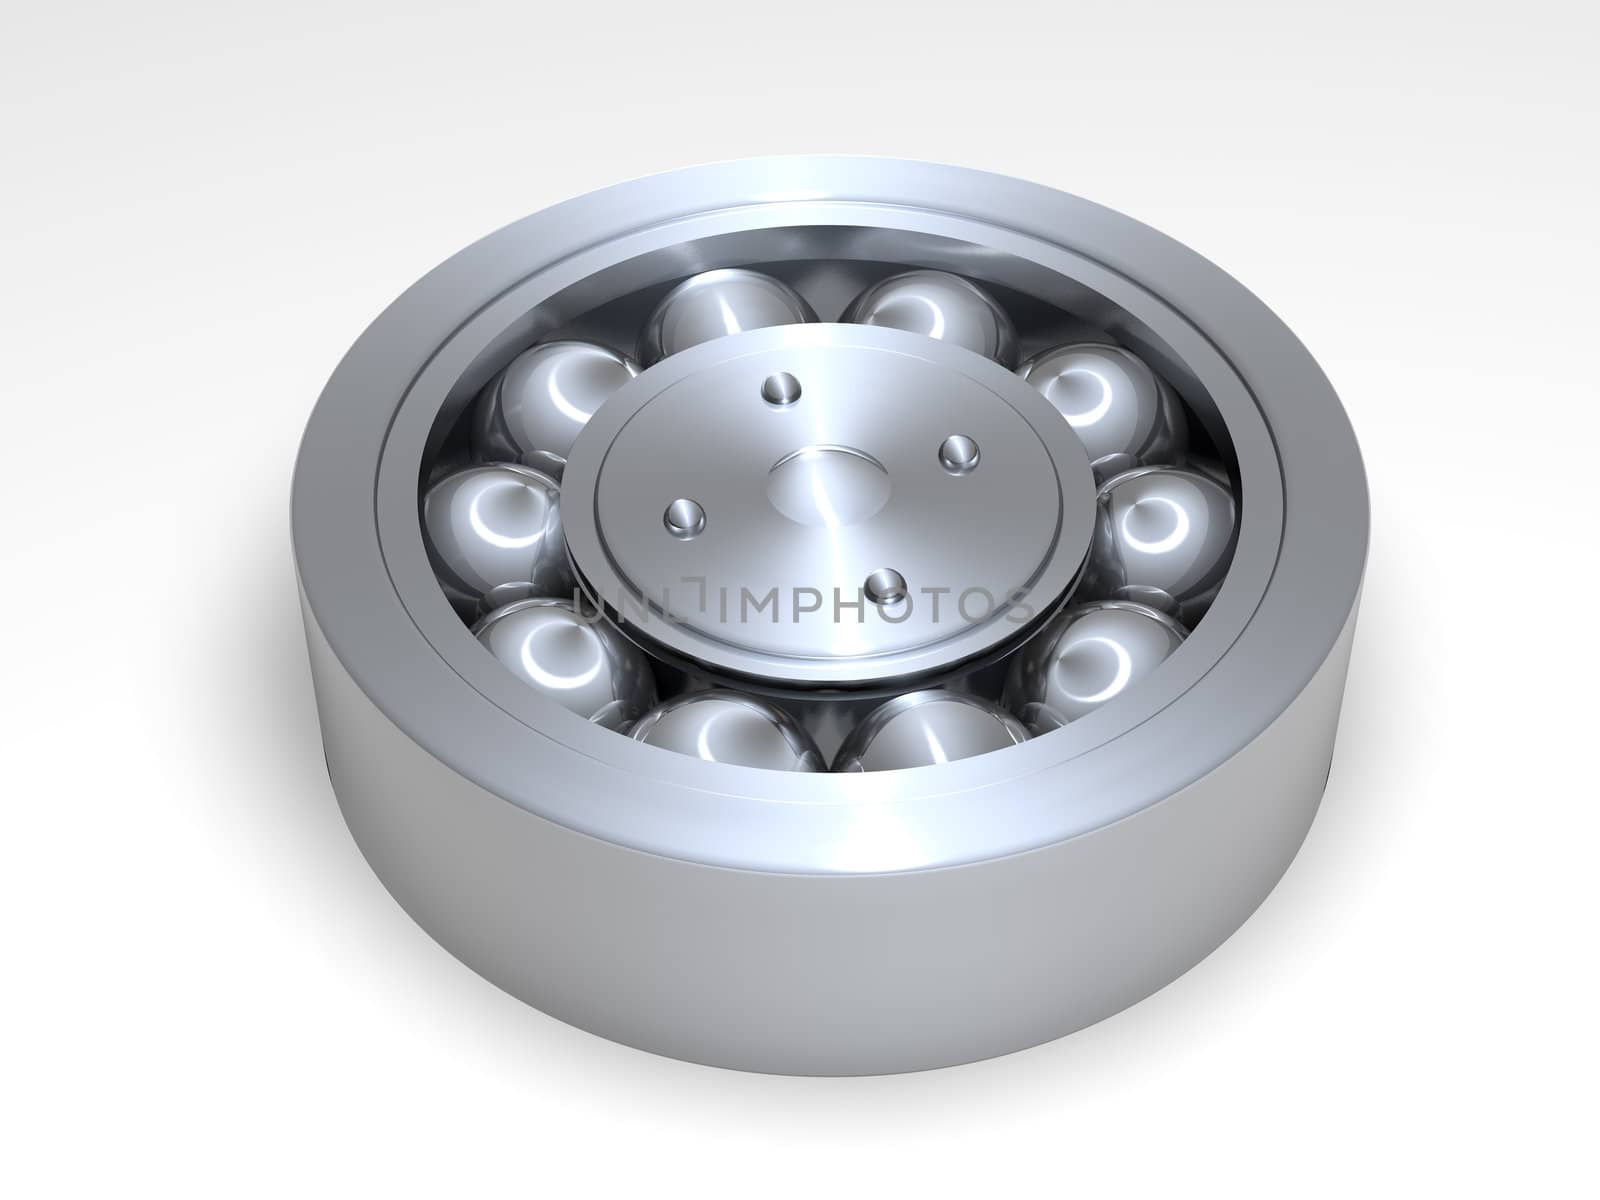 3d image of isolated bearing